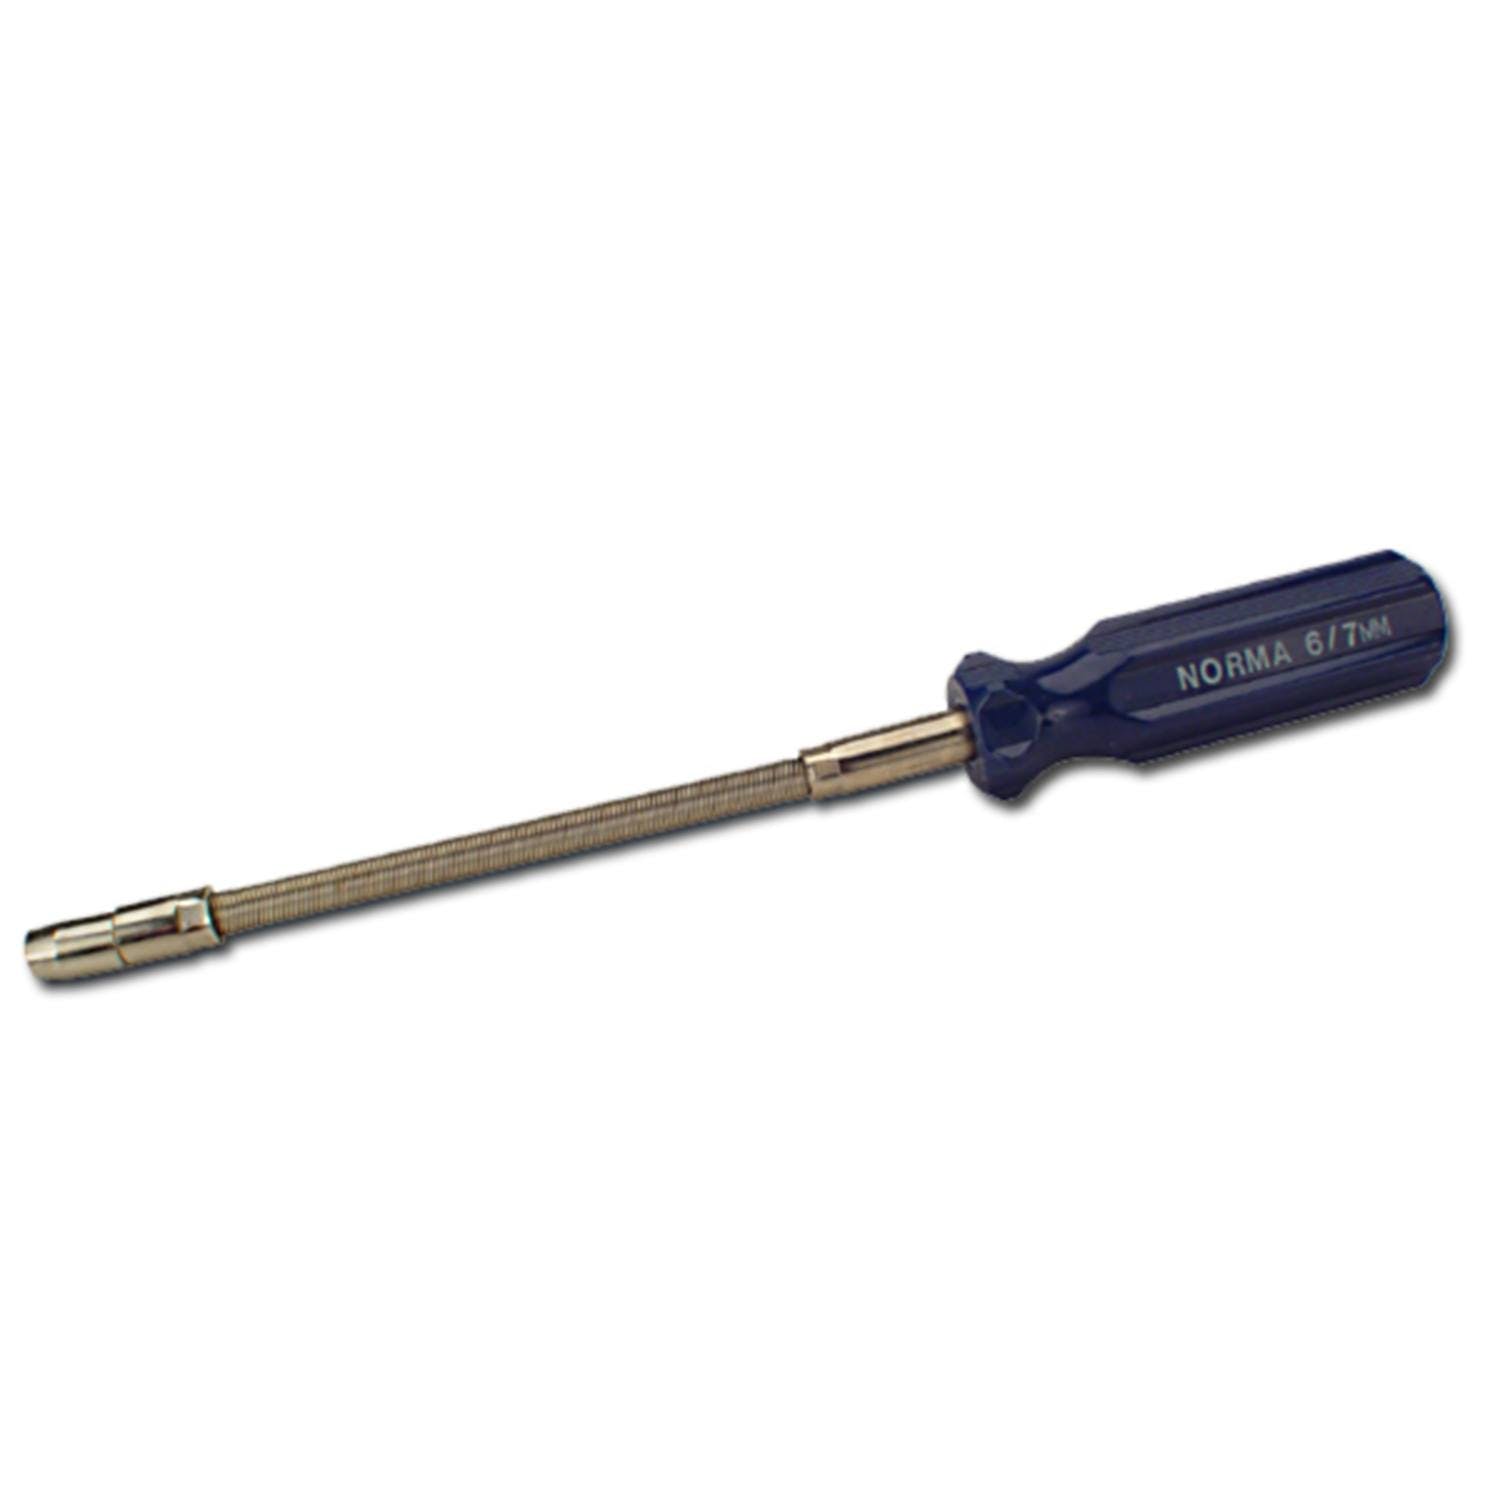 Competition Cams GFT-1 Flexhead Screwdriver